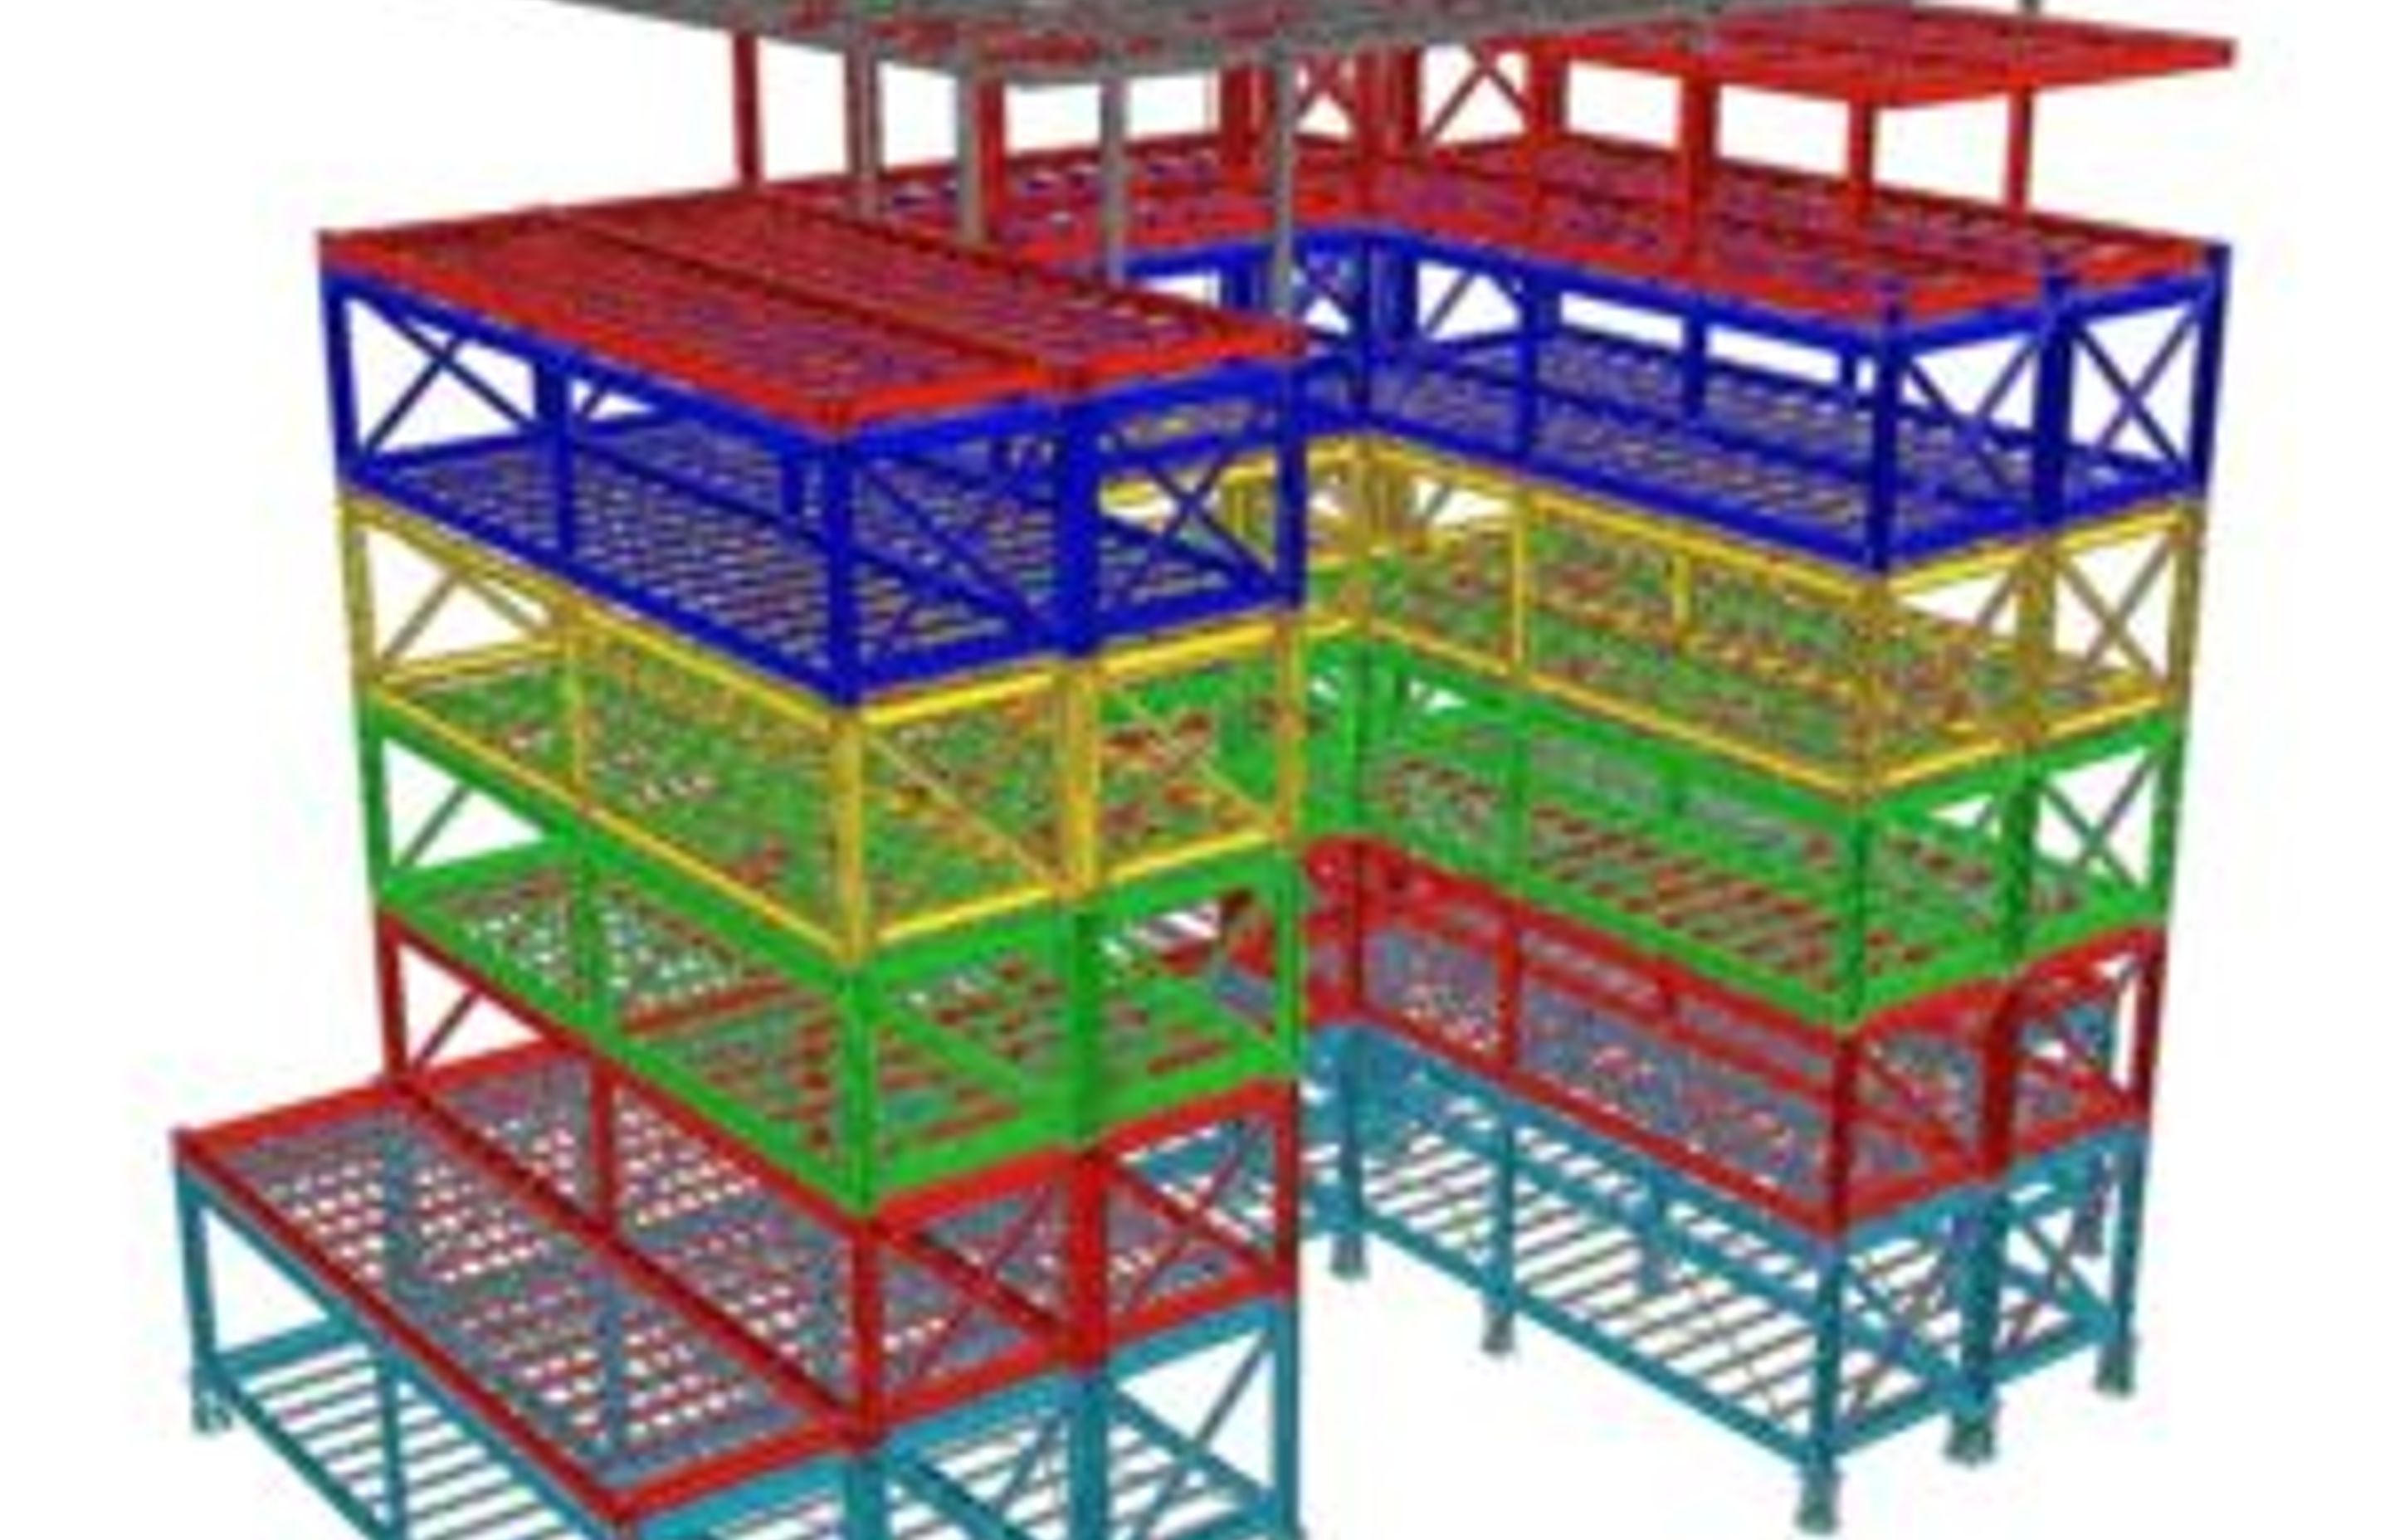 The structure of the building in Tekla.